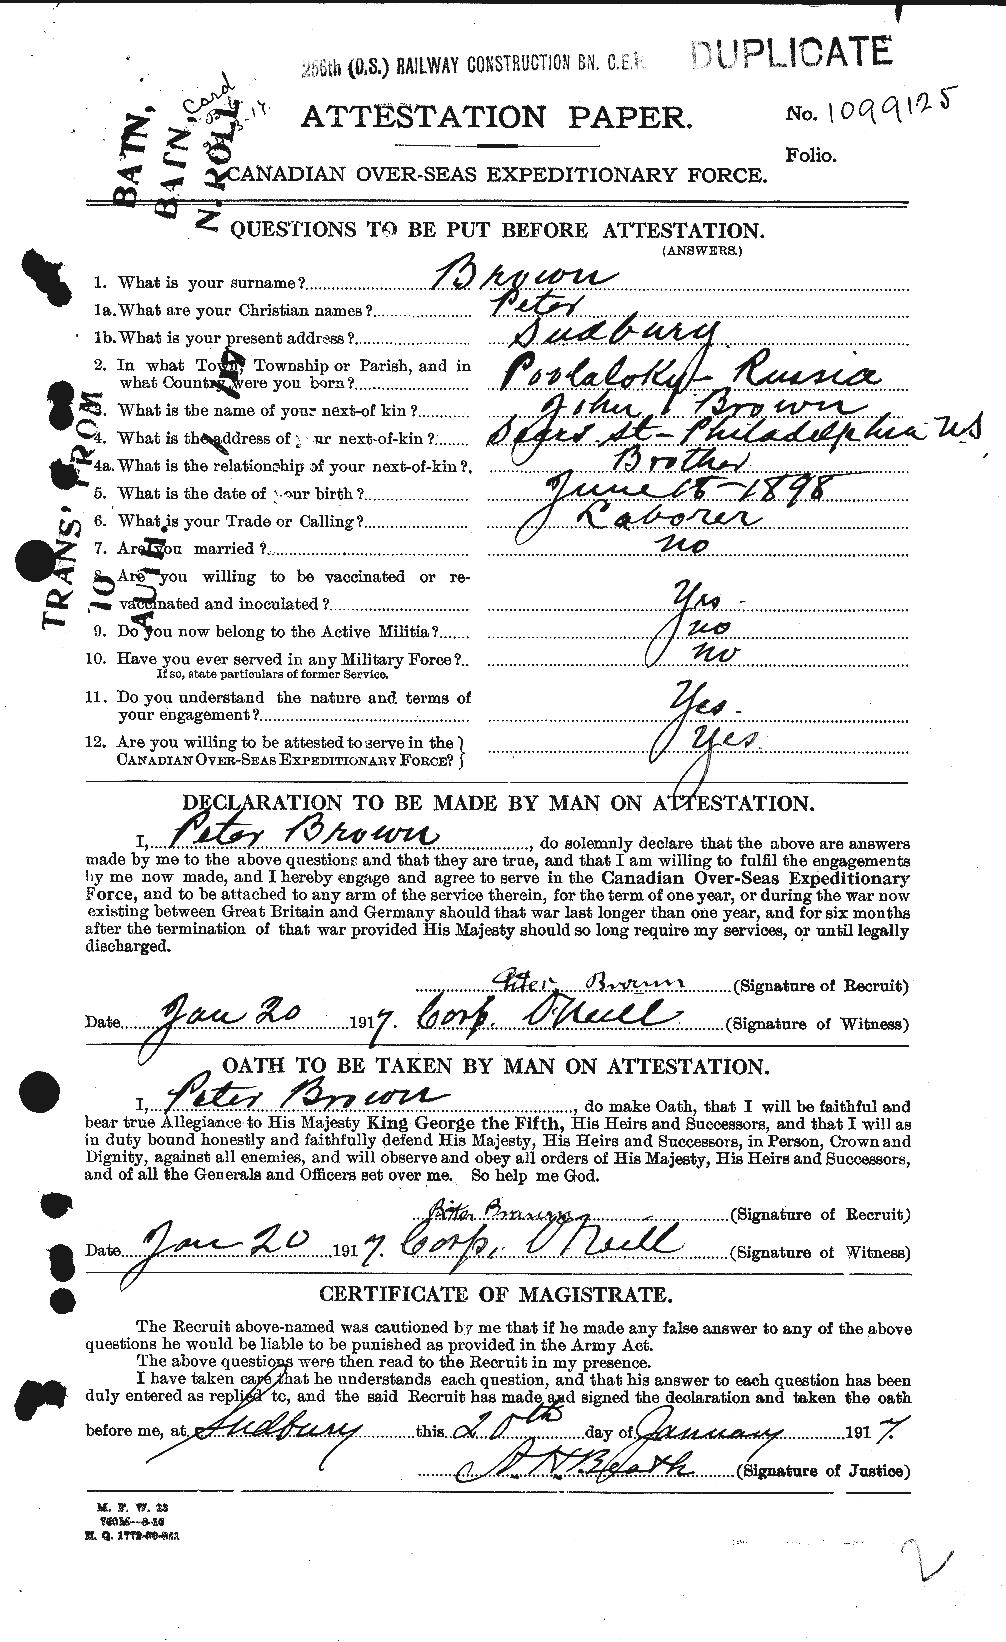 Personnel Records of the First World War - CEF 267190a